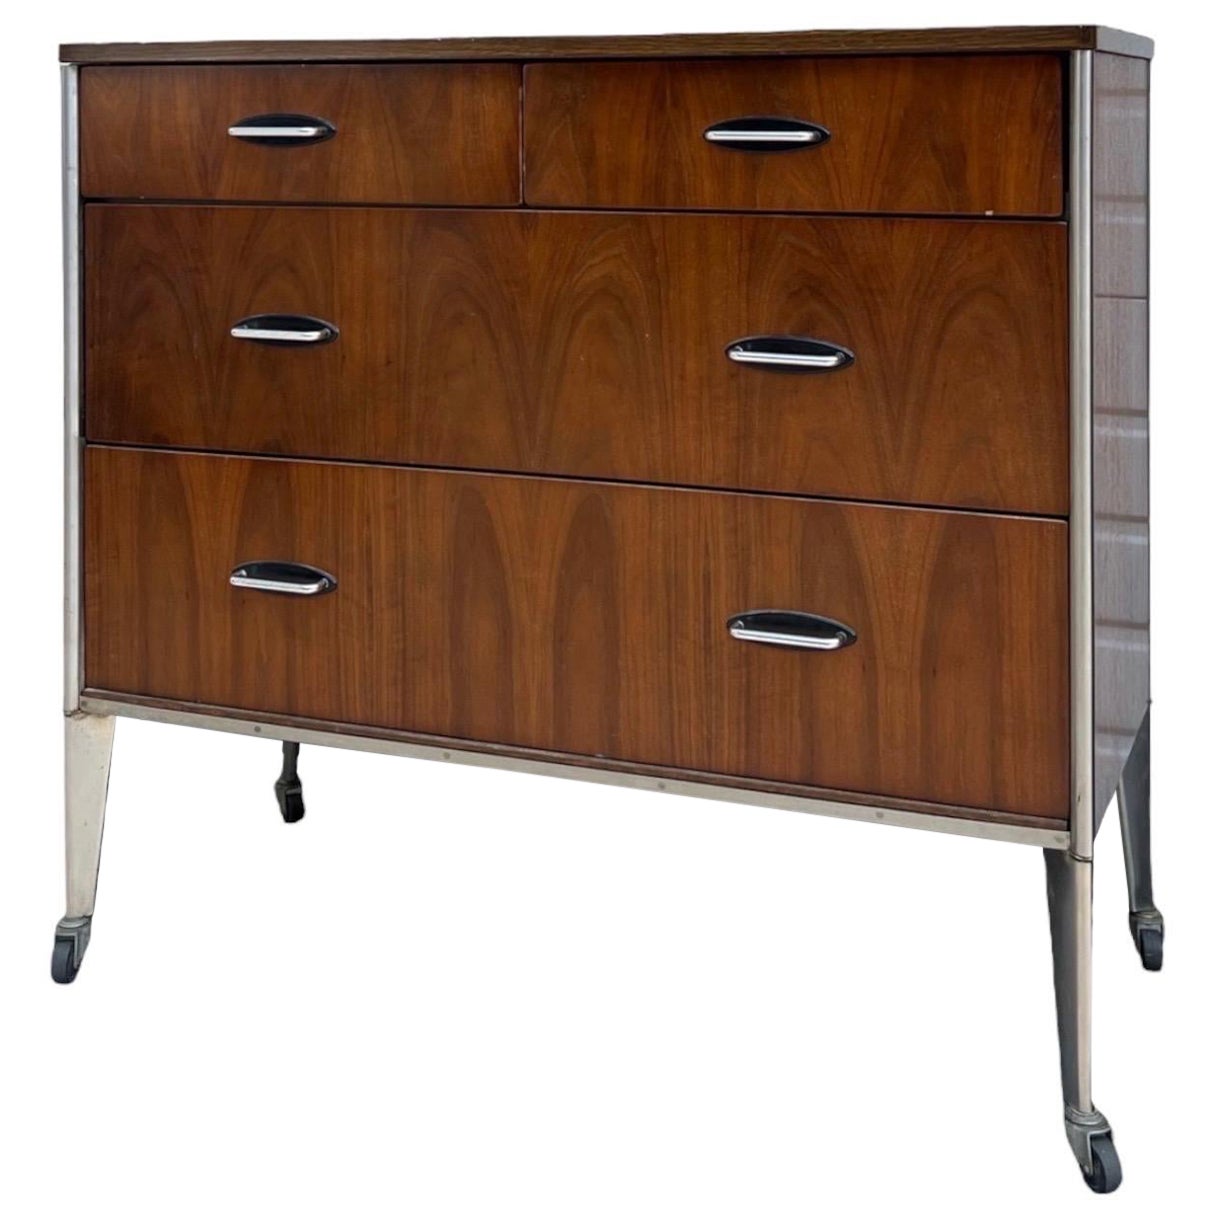 Vintage Mid Century Modern Dresser By Raymond Loewy For Hill Rom Walnut Casters 